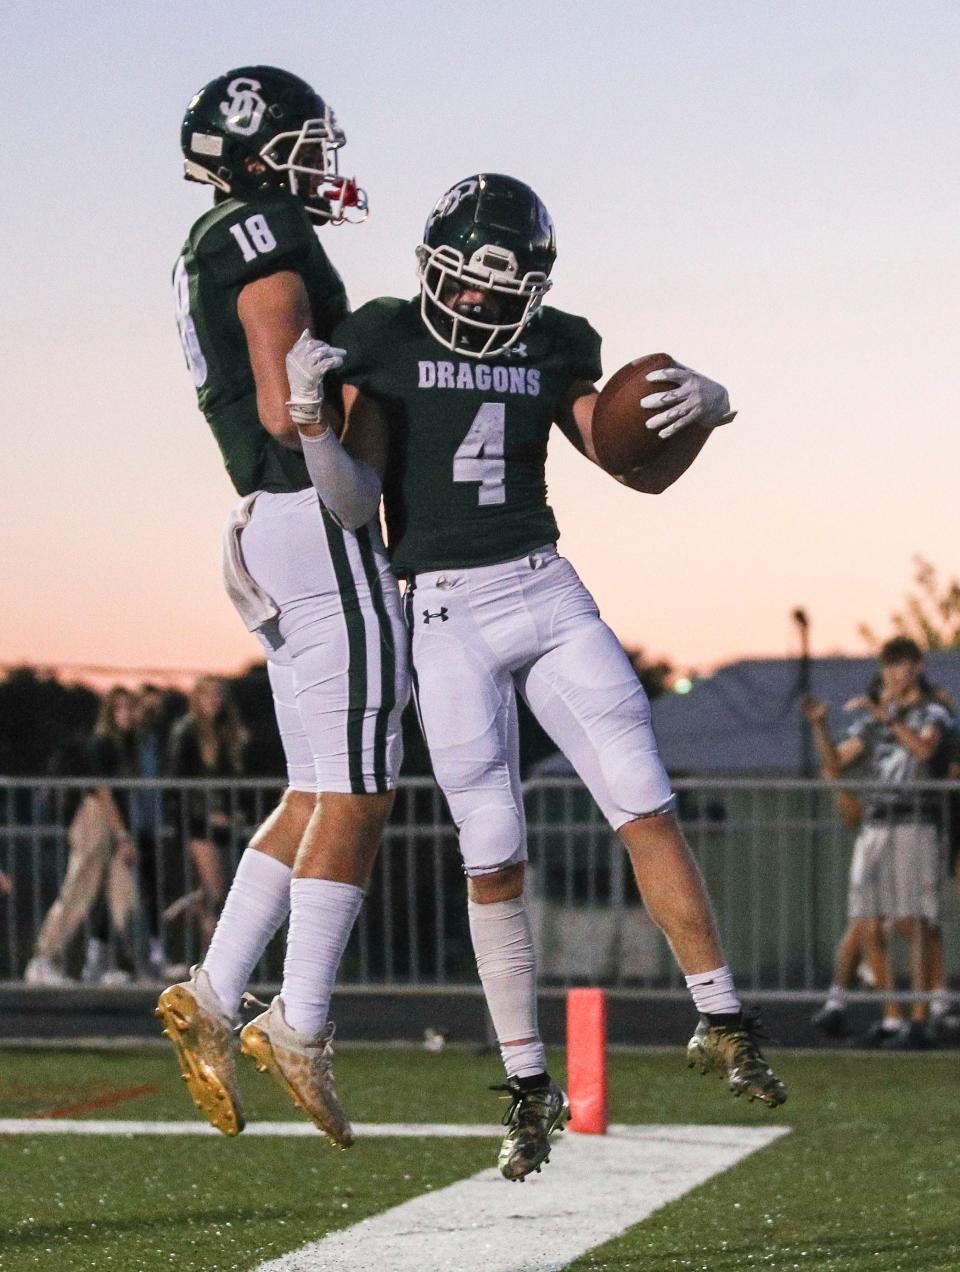 South Oldham's Jeffrey Burton, right, celebrates after his touchdown with teammate Andrew Farr while playing against Atherton in Friday night football at South Oldham High School. Sept. 30, 2022